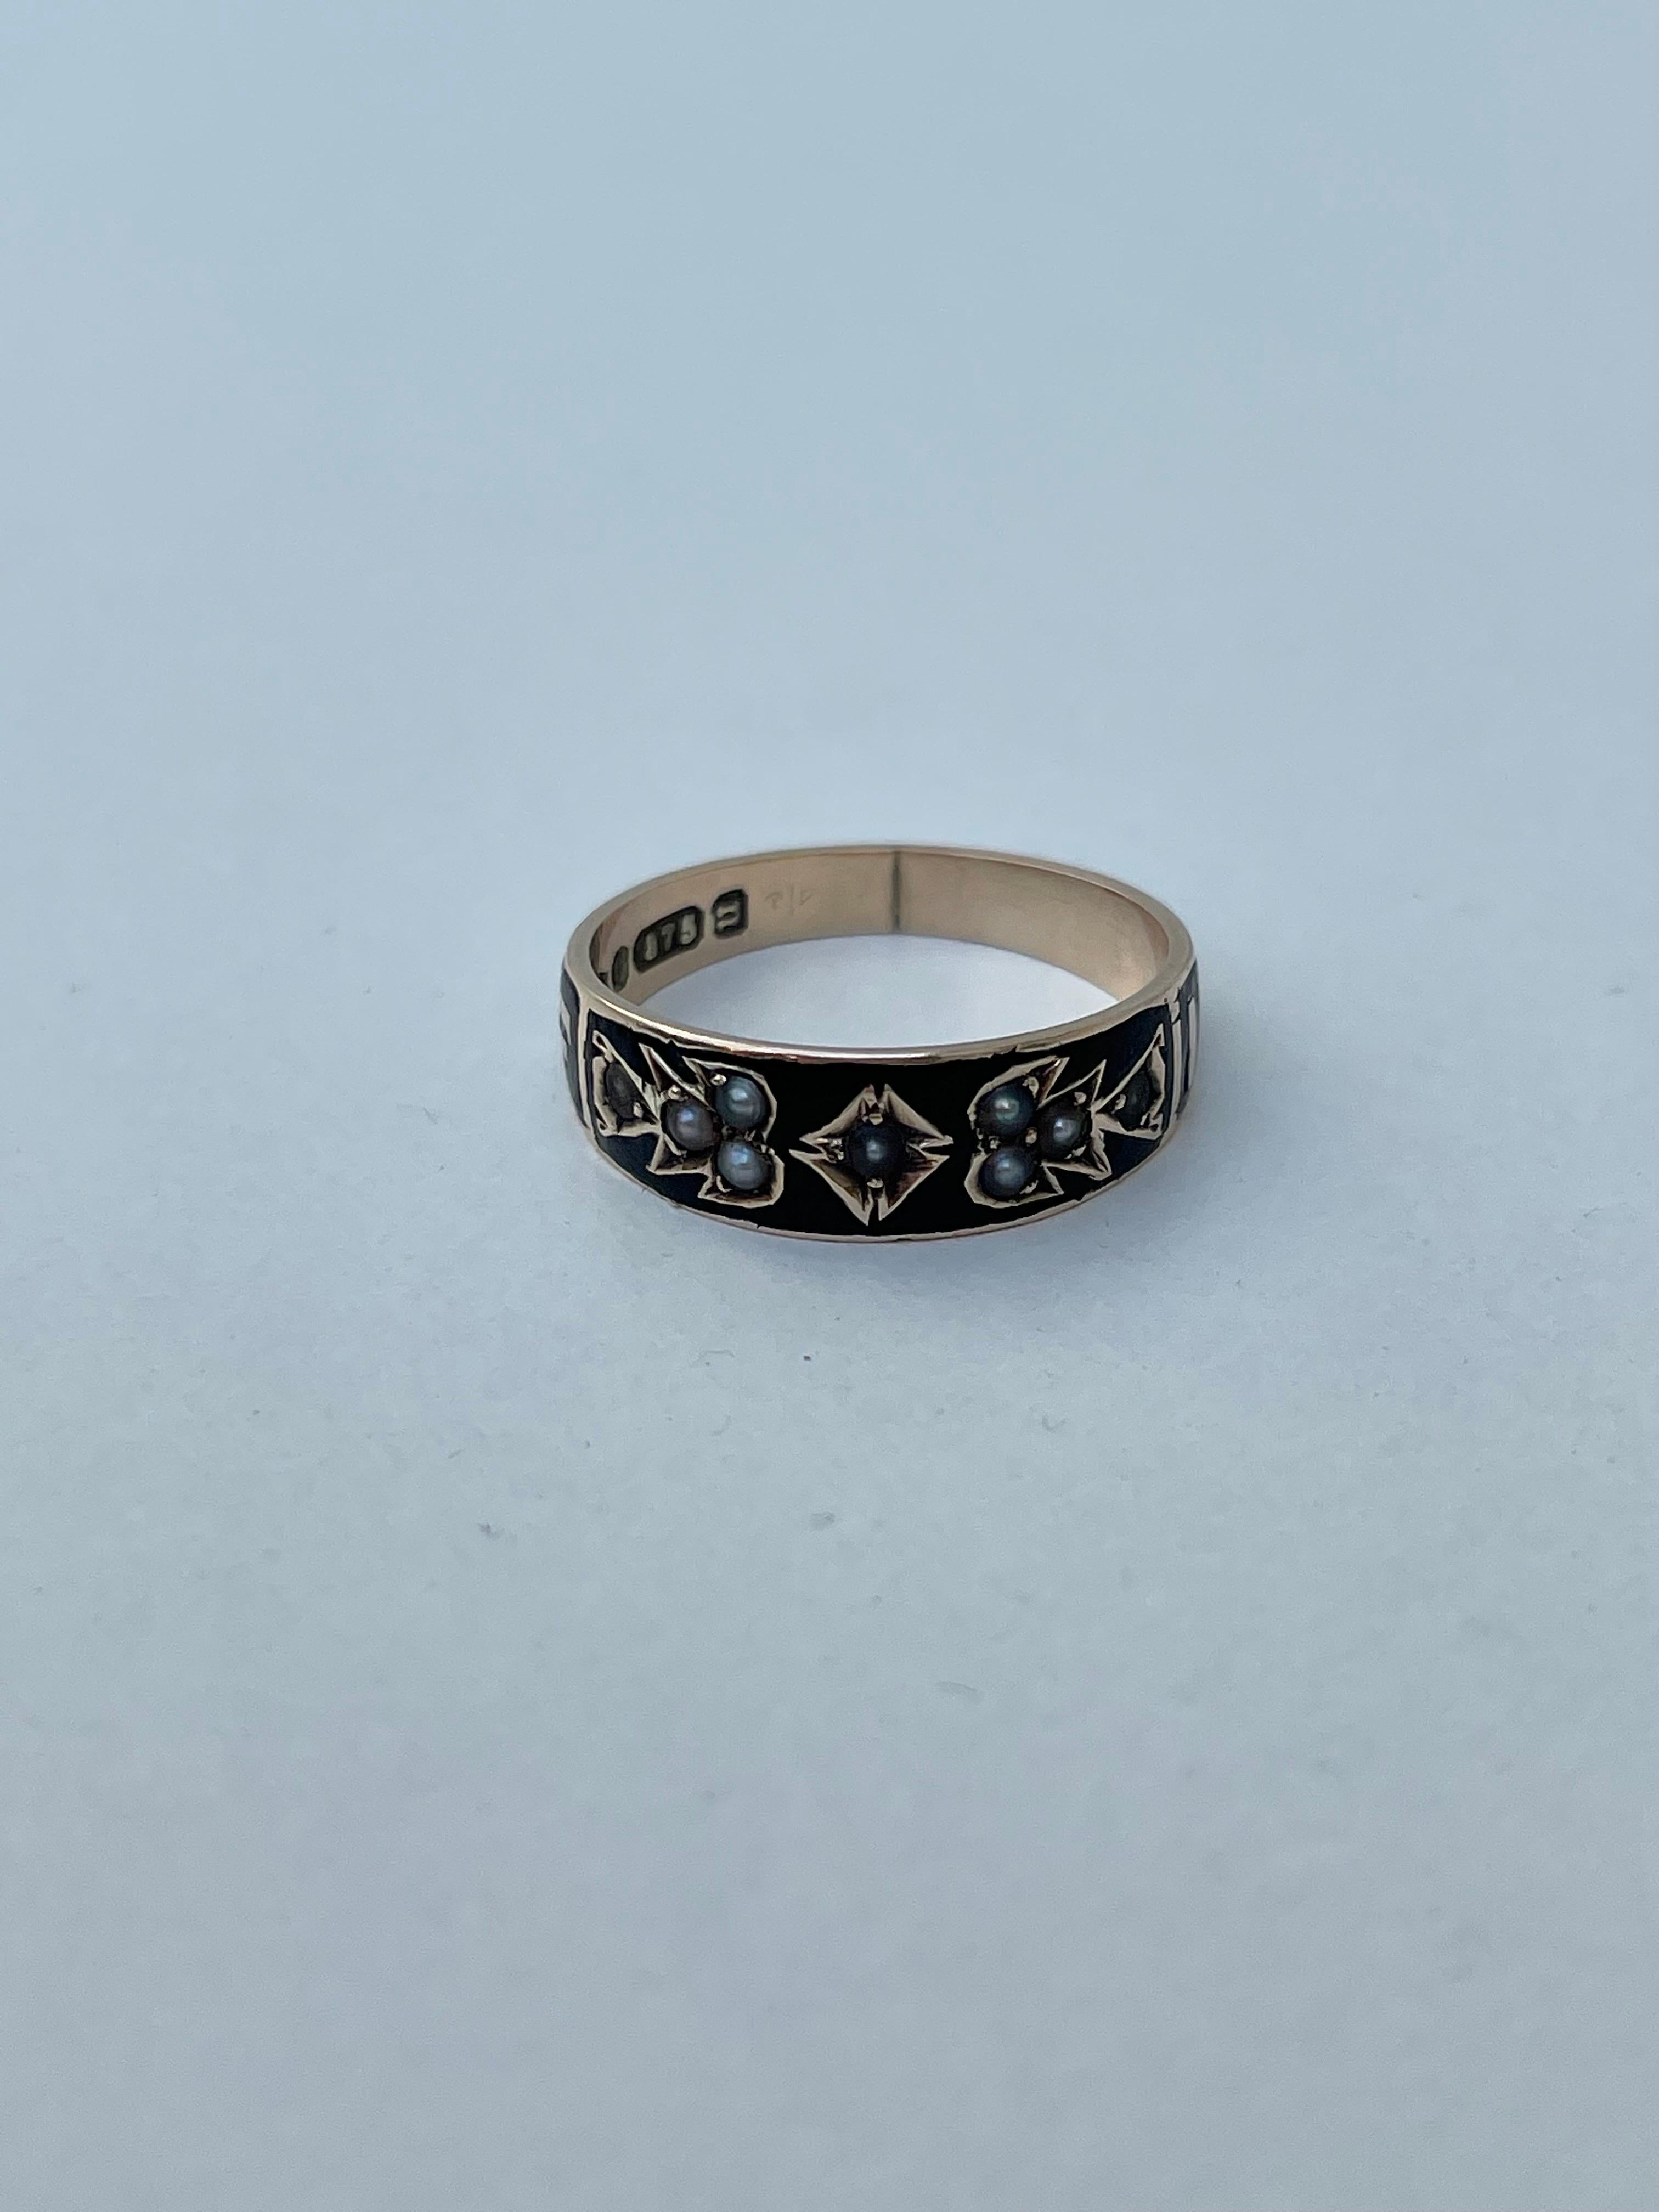 Antique Black Enamel Pearl Ring in 9ct Yellow Gold 

“in memory of” ring, charming and chunky 

The item comes without the box in the photos but will be presented in a gembank1973 gift box

Measurements: weight 2.68g, size O1/2, height off finger